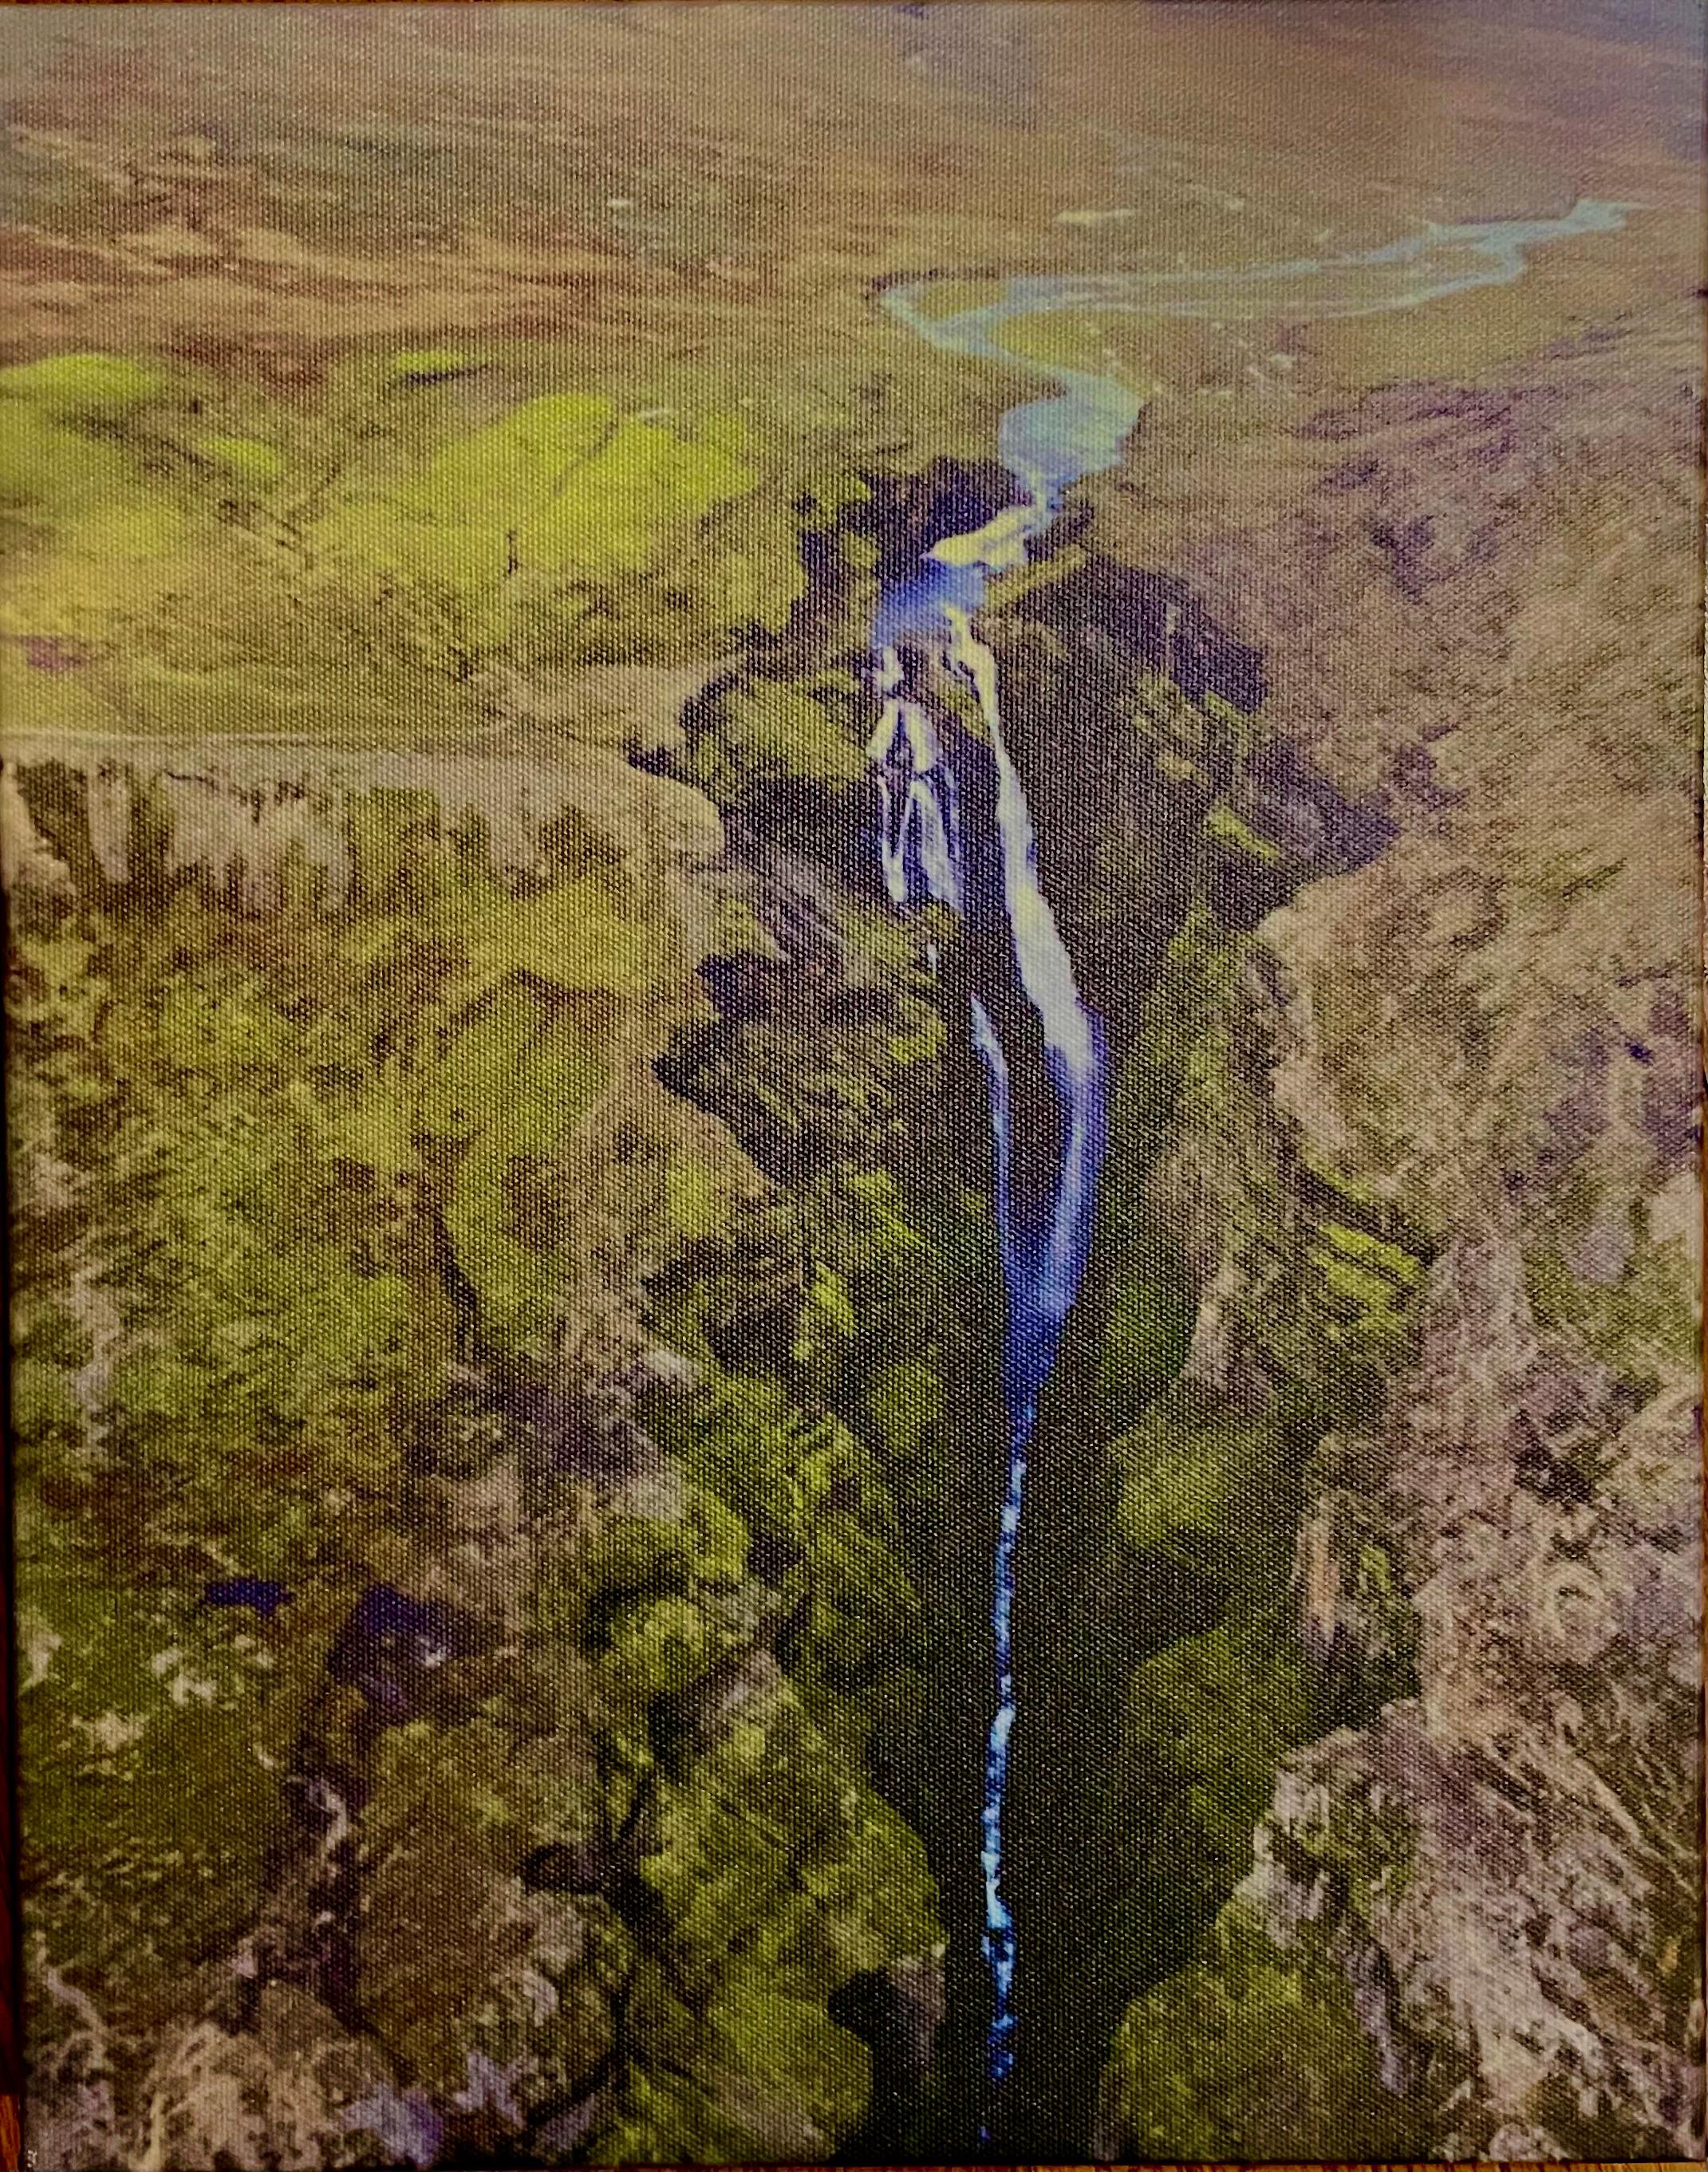 Unknown Landscape Photograph - "Icelandic Waterfall"   photography on canvas by Deborah Benedic